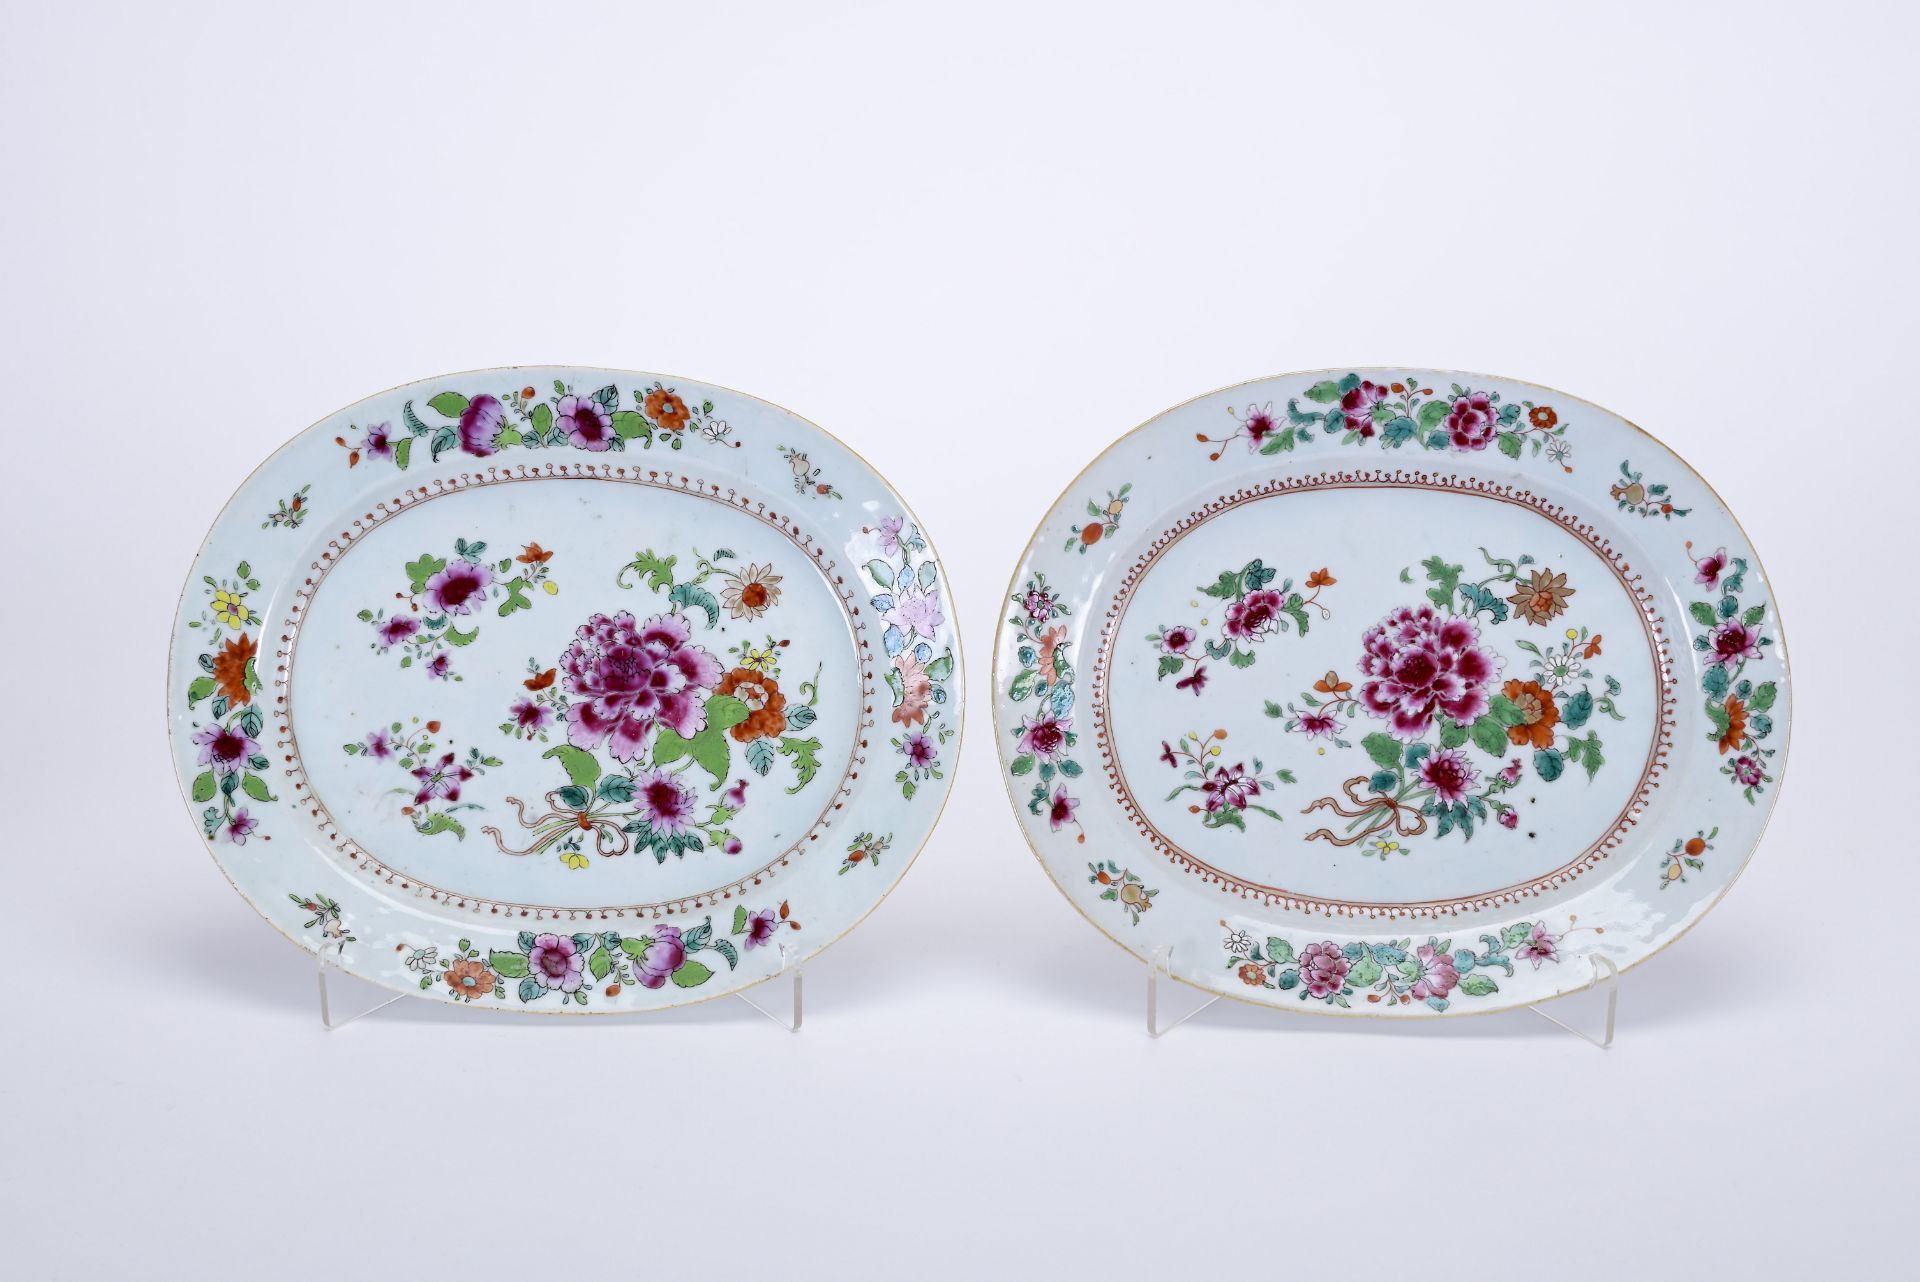 A pair of oval platters